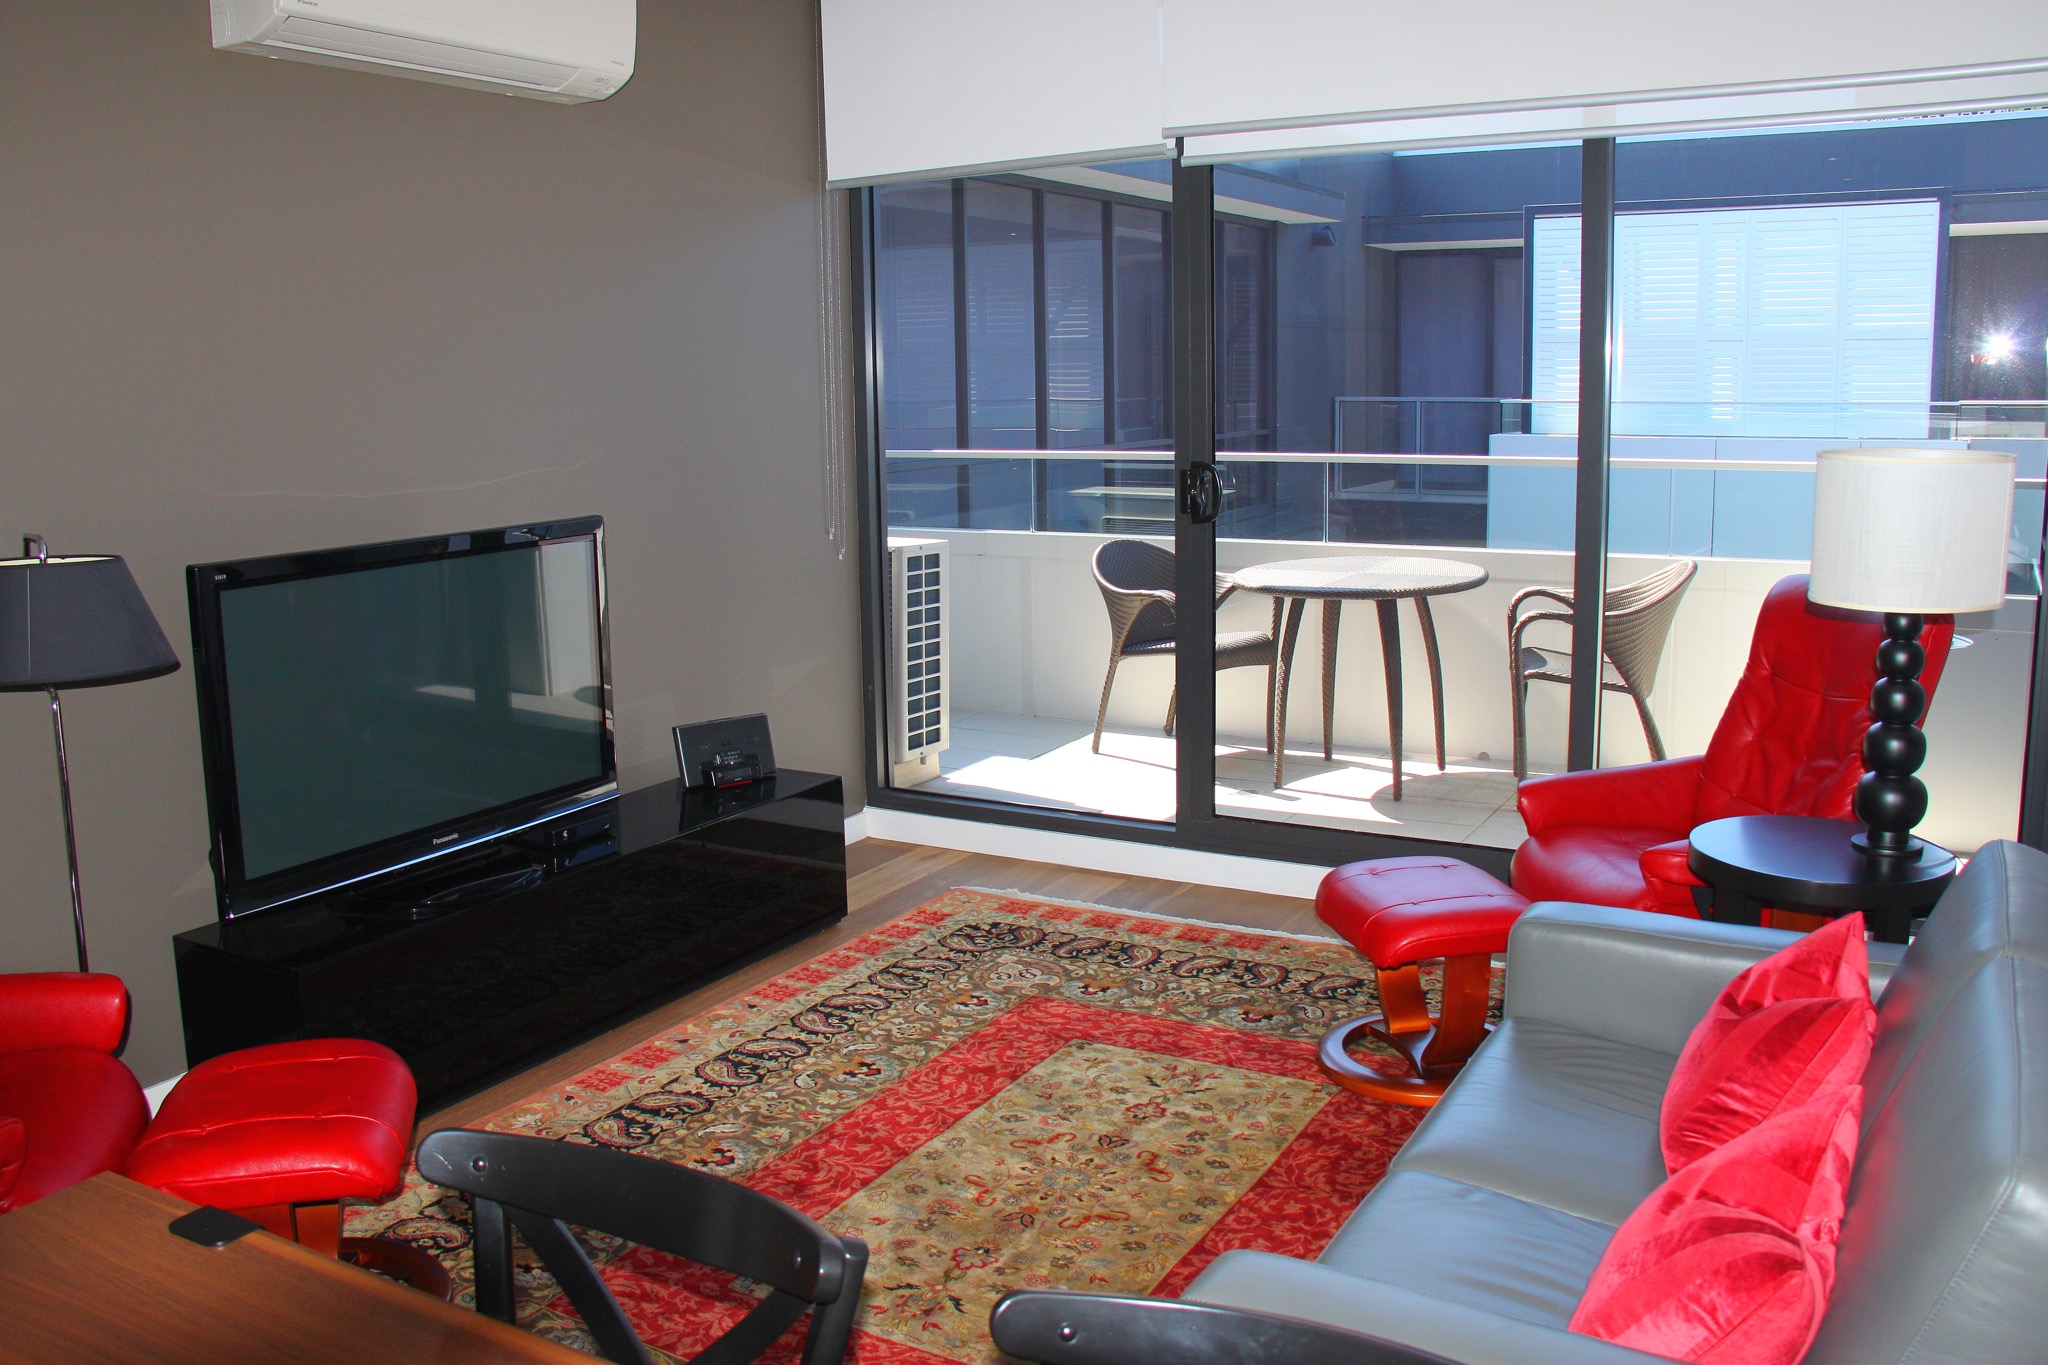 New Apartments For Rent Brighton Vic for Large Space